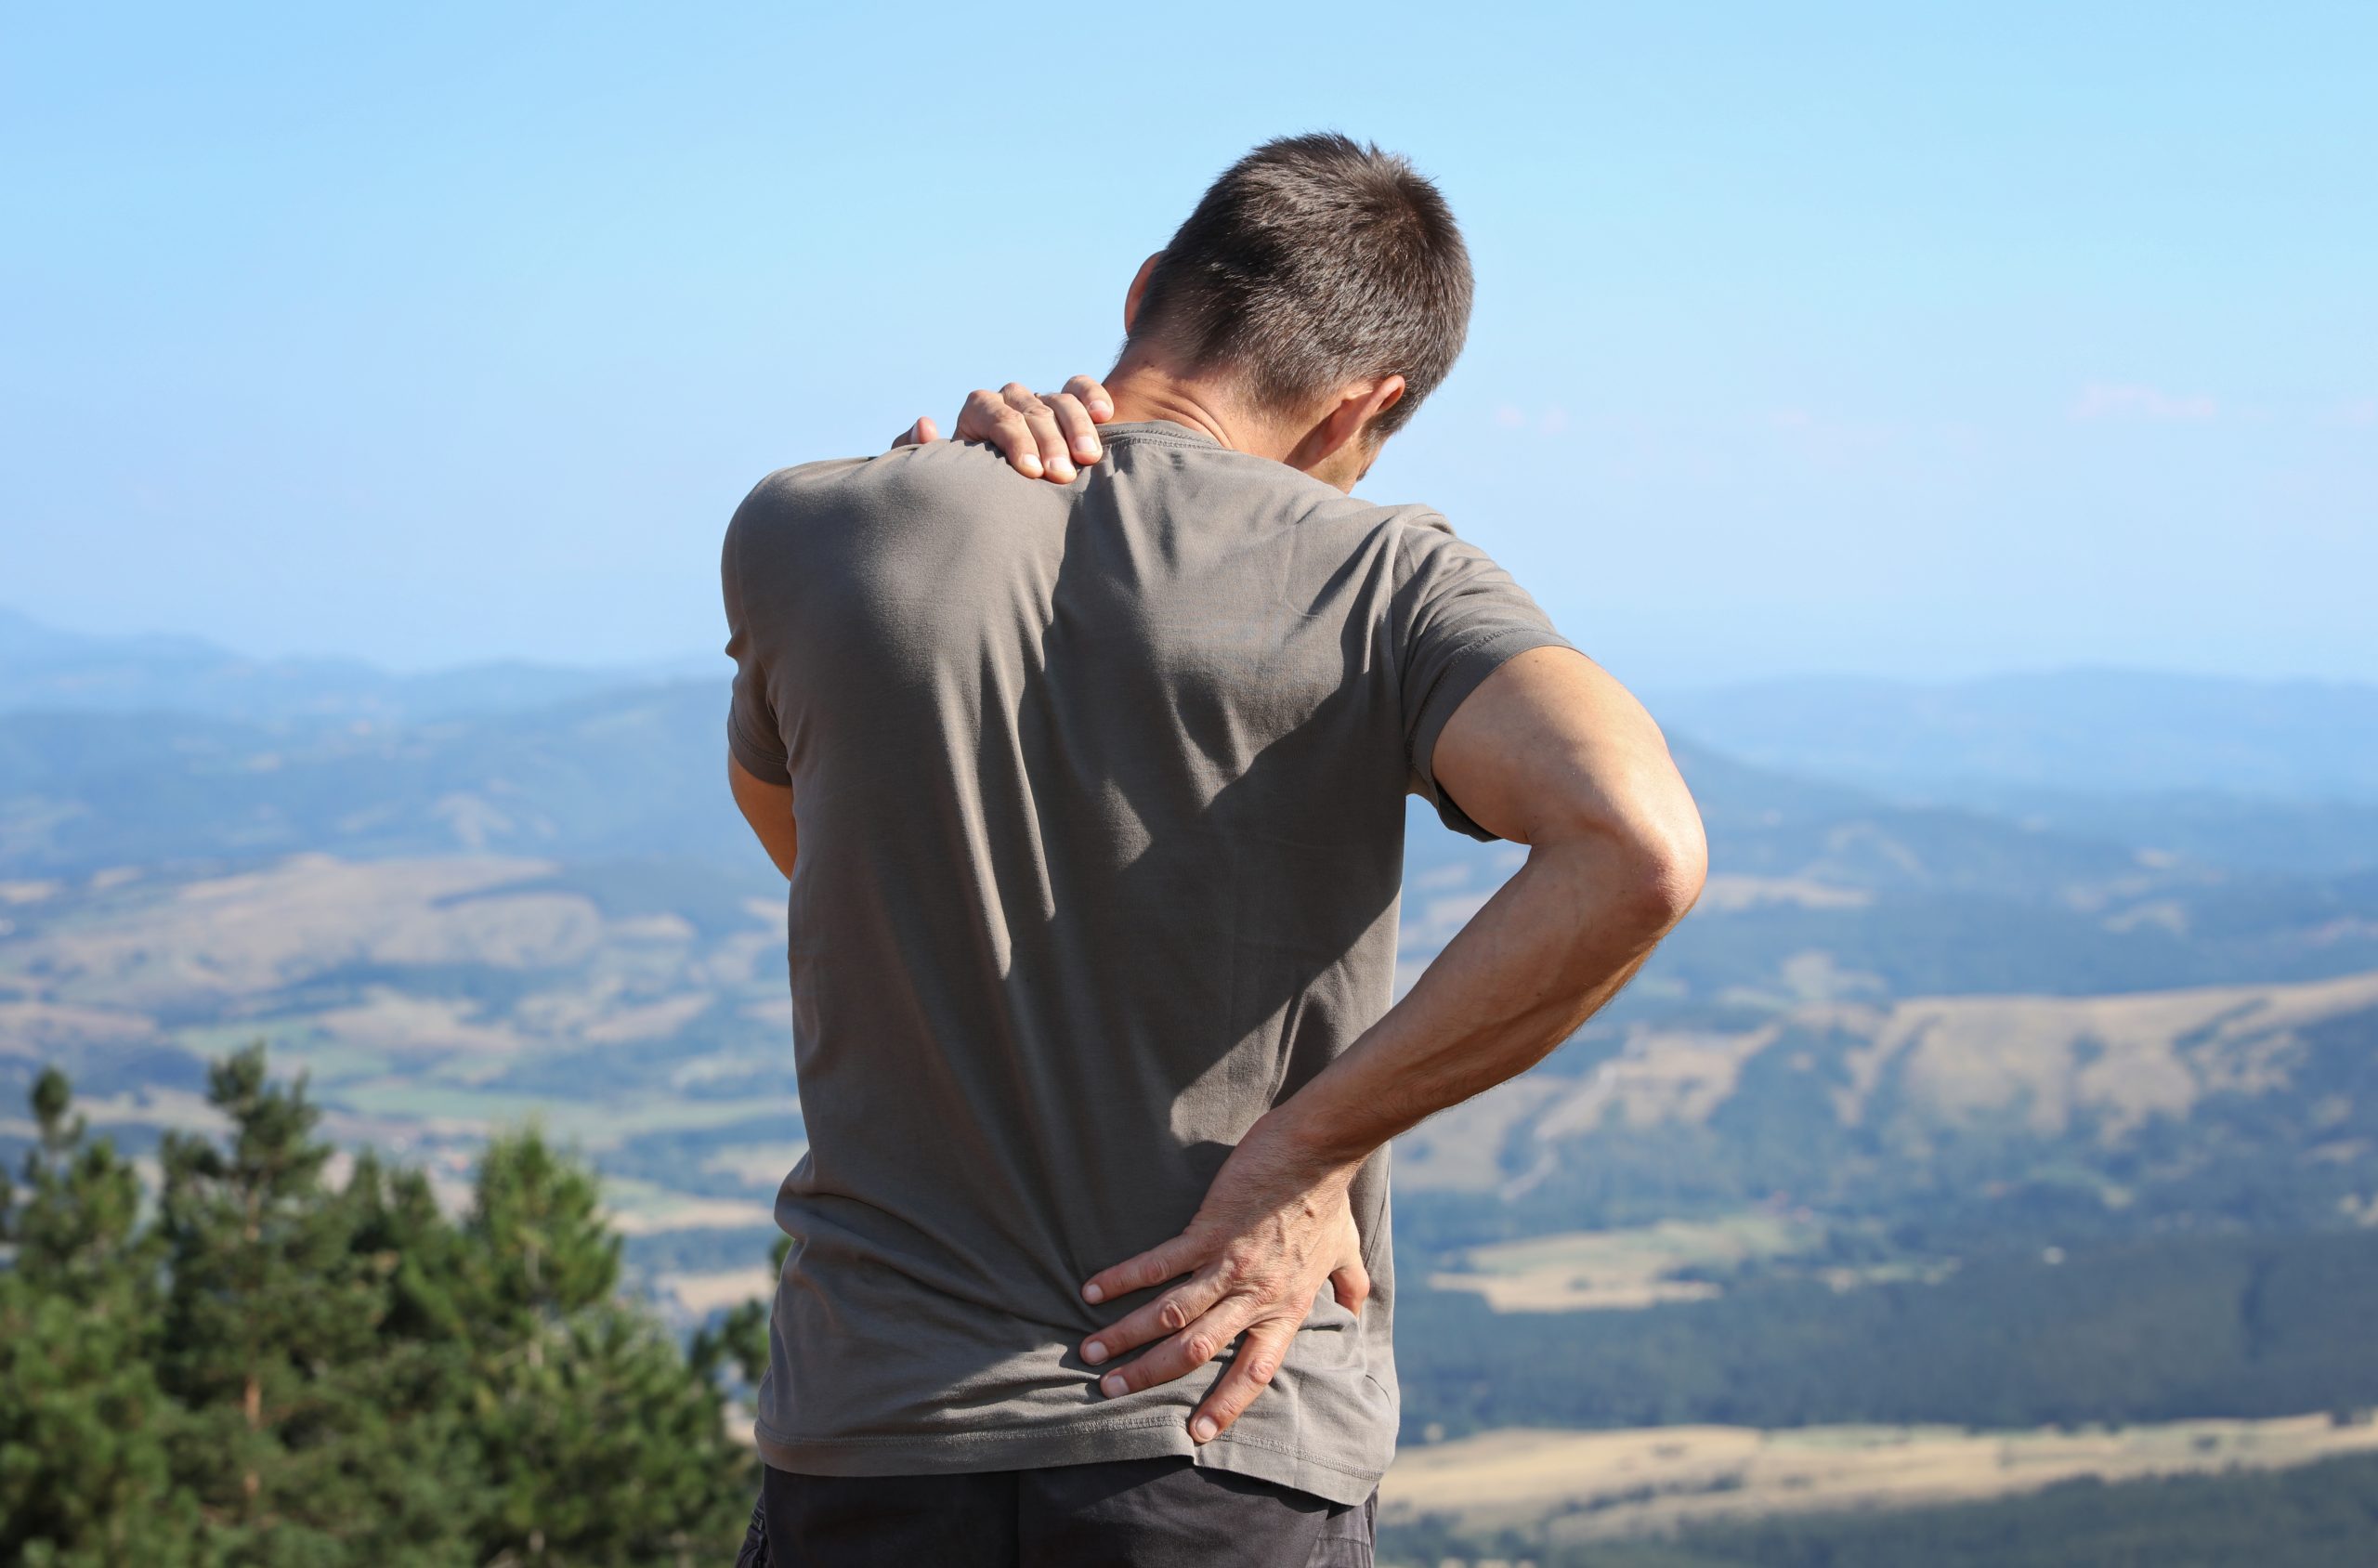 Are physios good for back pain?